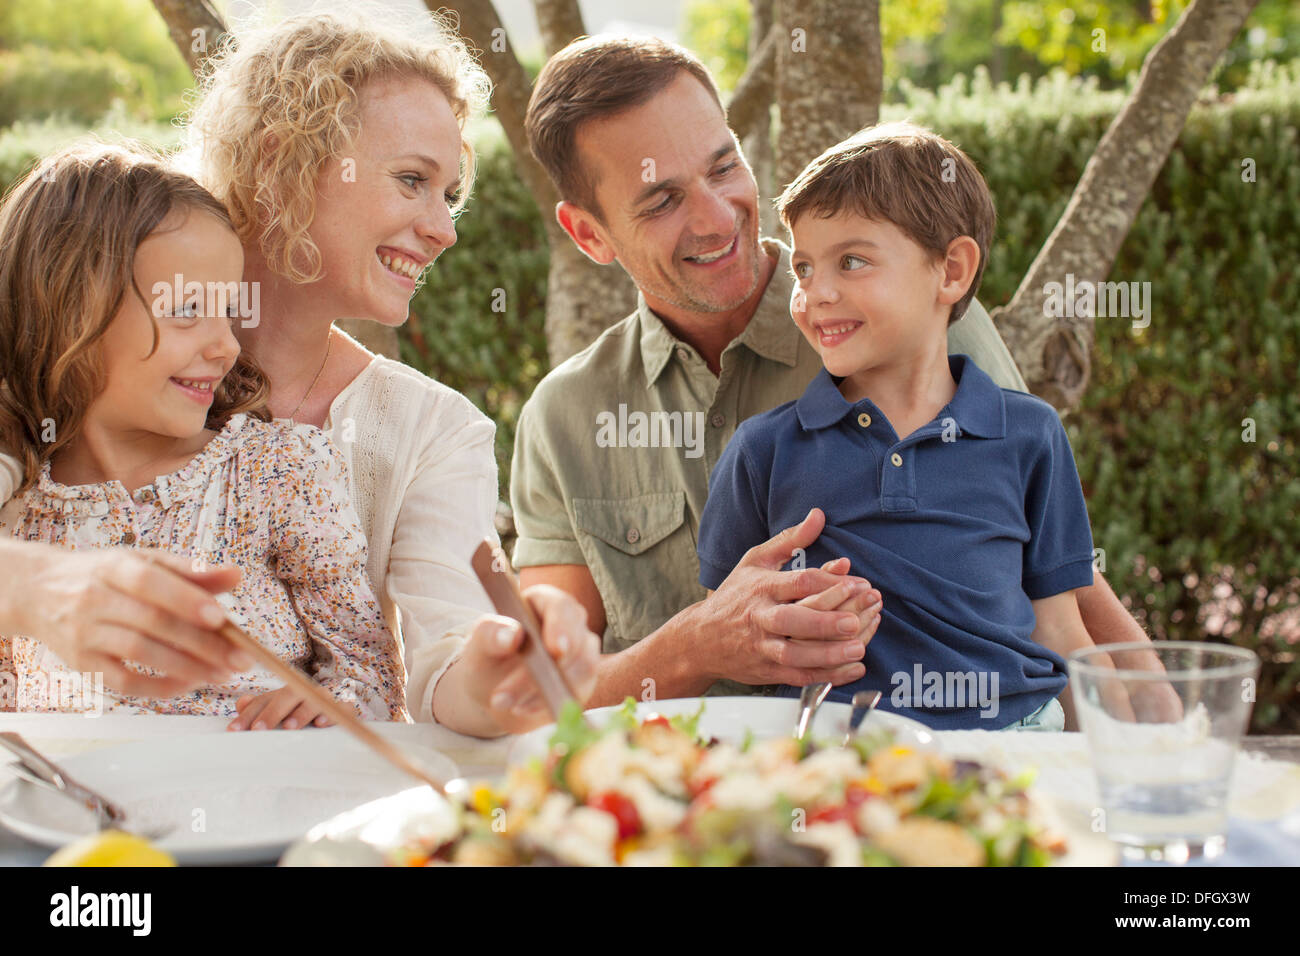 Family eating outdoors Stock Photo